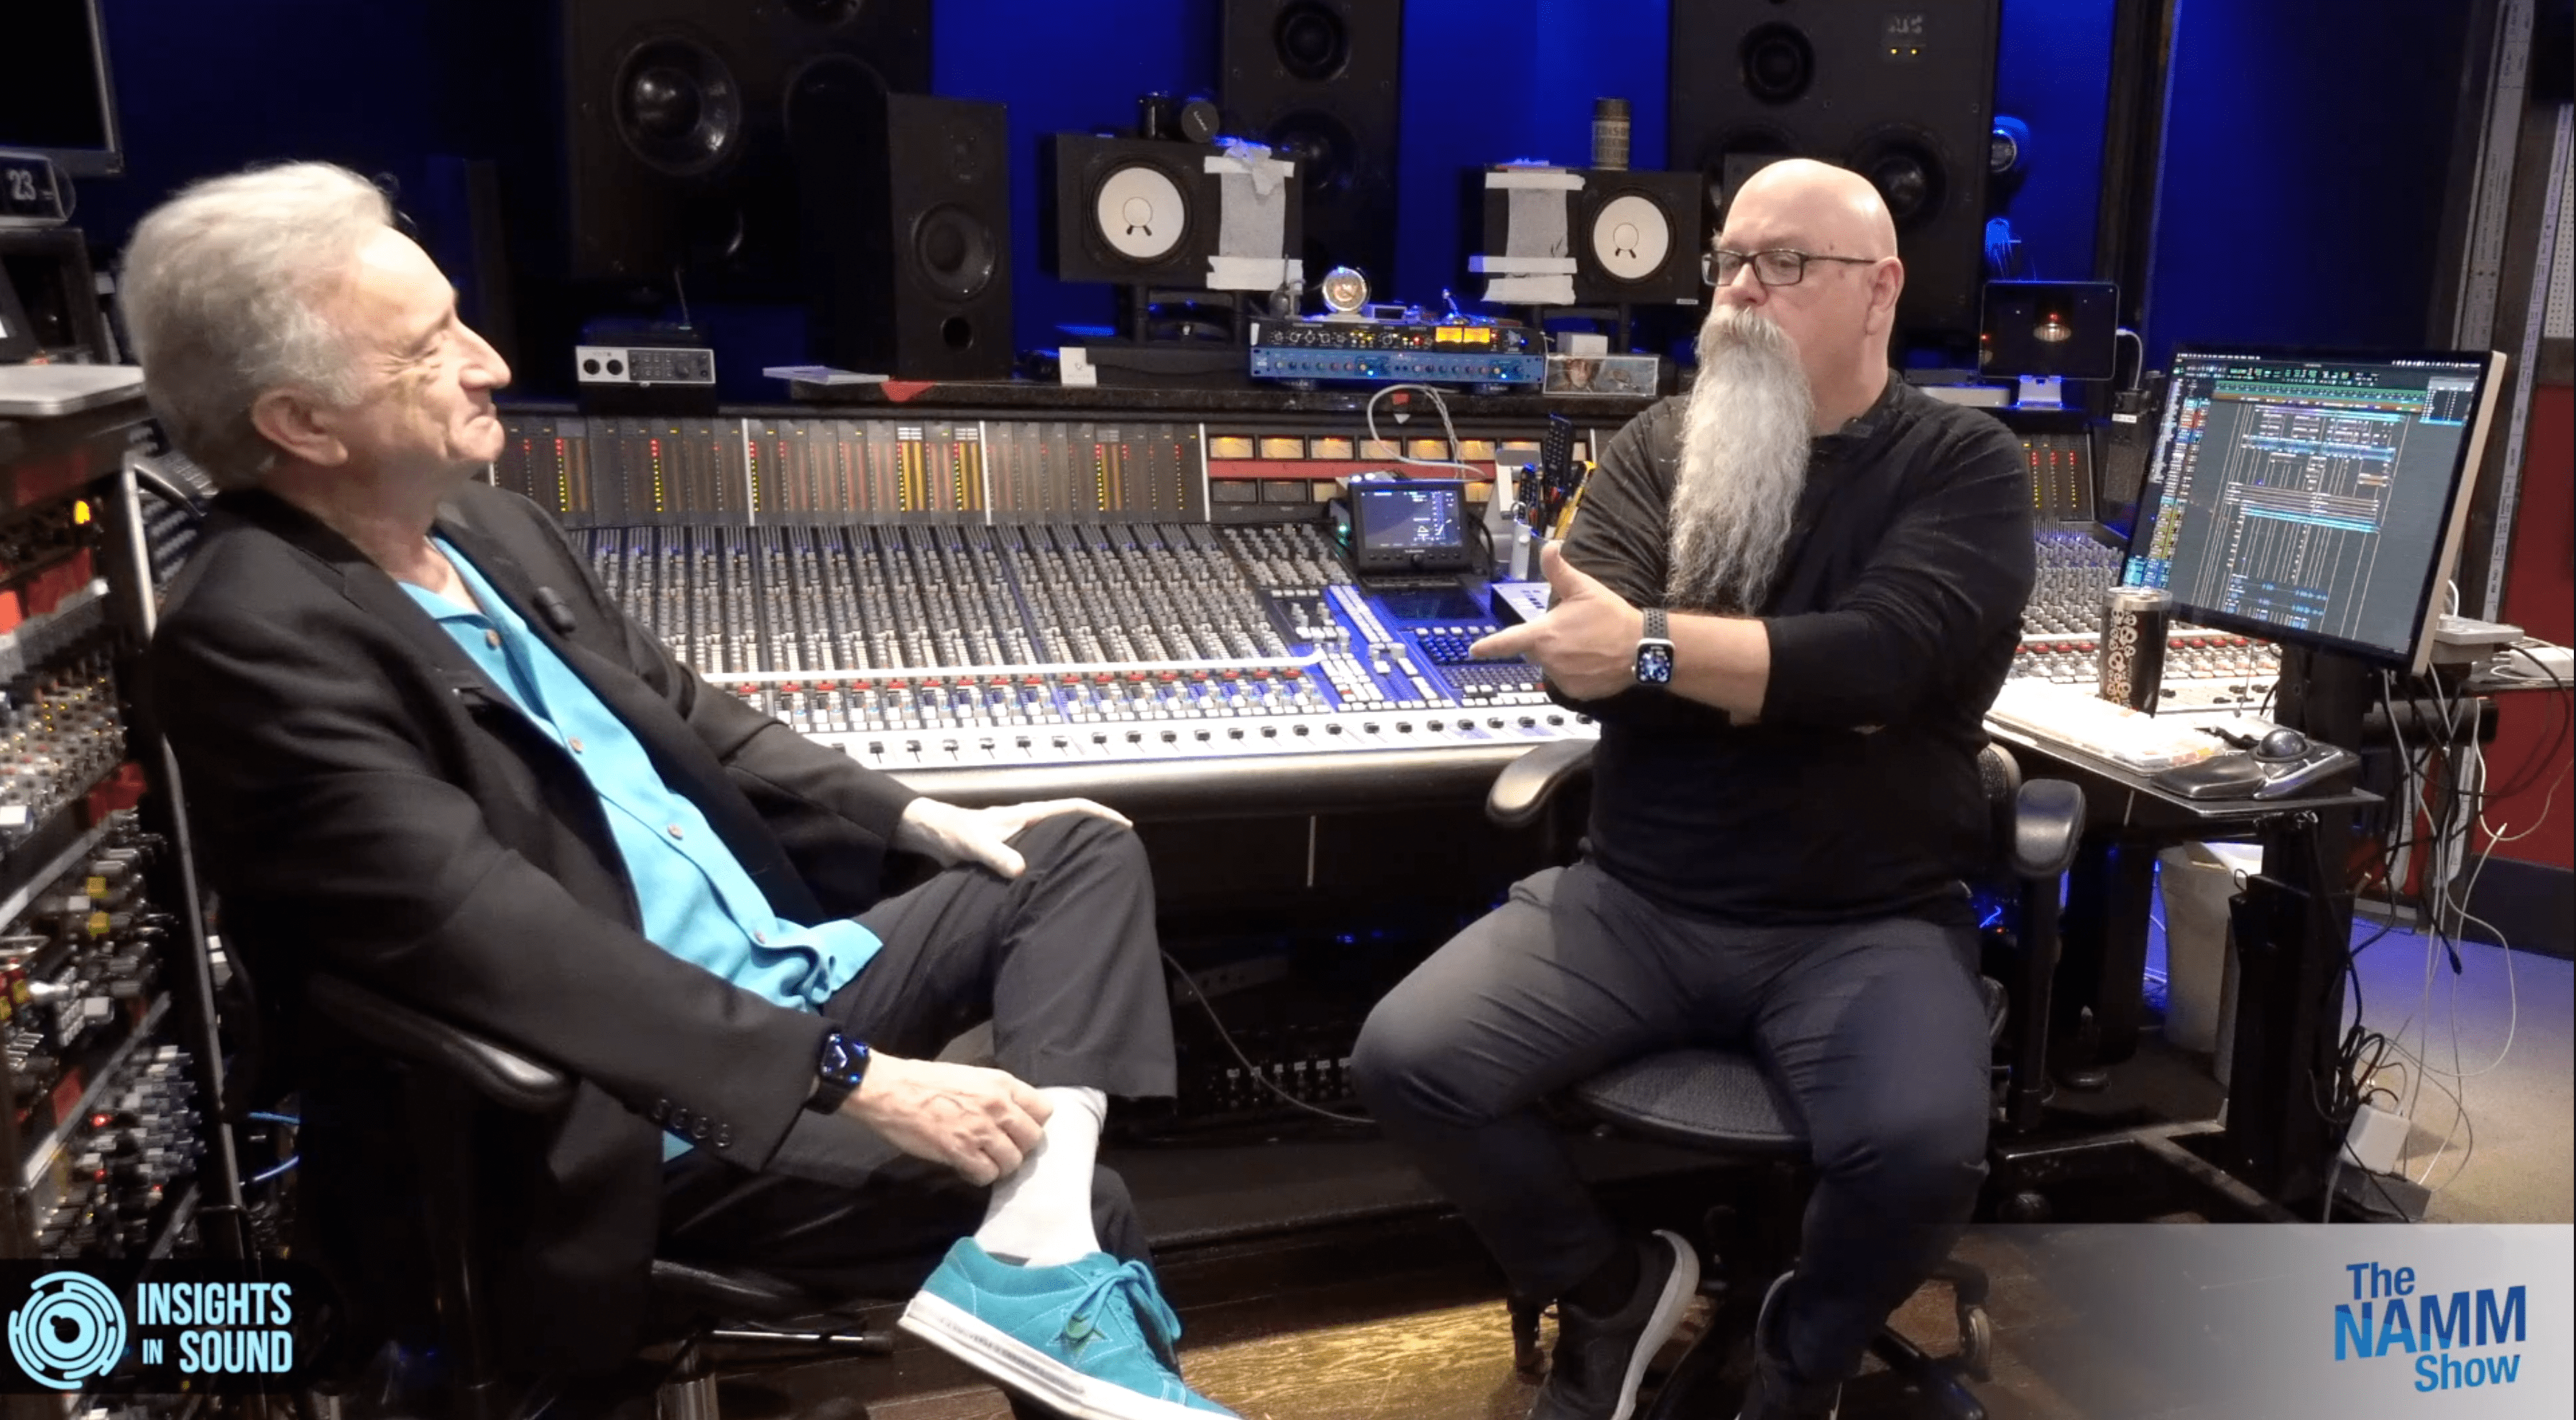 Insights In Sound – Vance Powell, Engineer/Producer – Season 11, Episode 7 (#107)